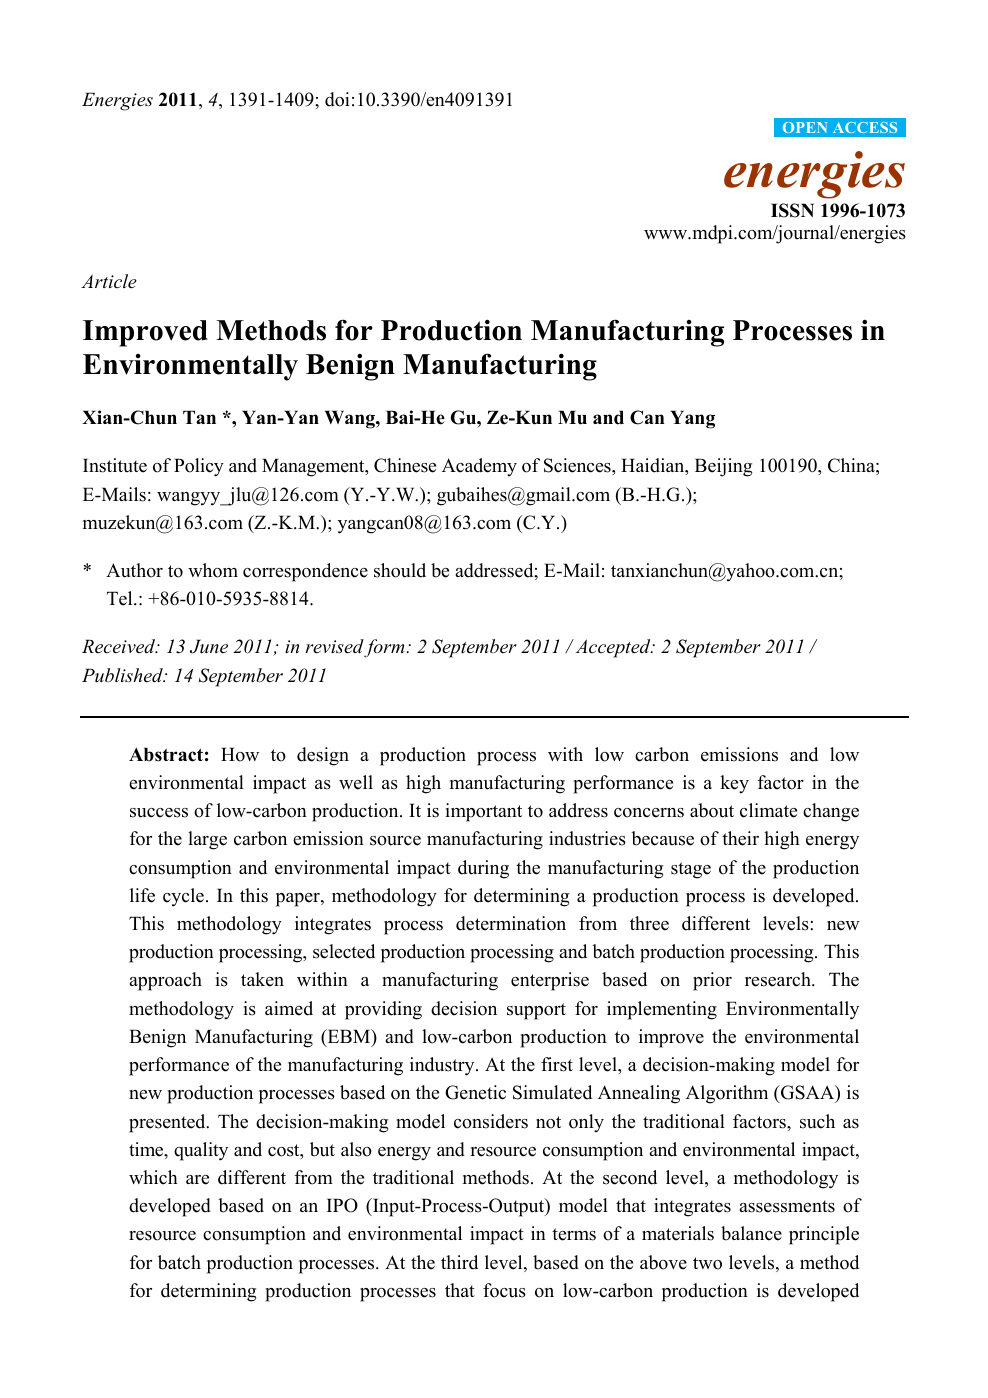 Improved Methods For Production Manufacturing Processes In Environmentally Benign Manufacturing Topic Of Research Paper In Mechanical Engineering Download Scholarly Article Pdf And Read For Free On Cyberleninka Open Science Hub